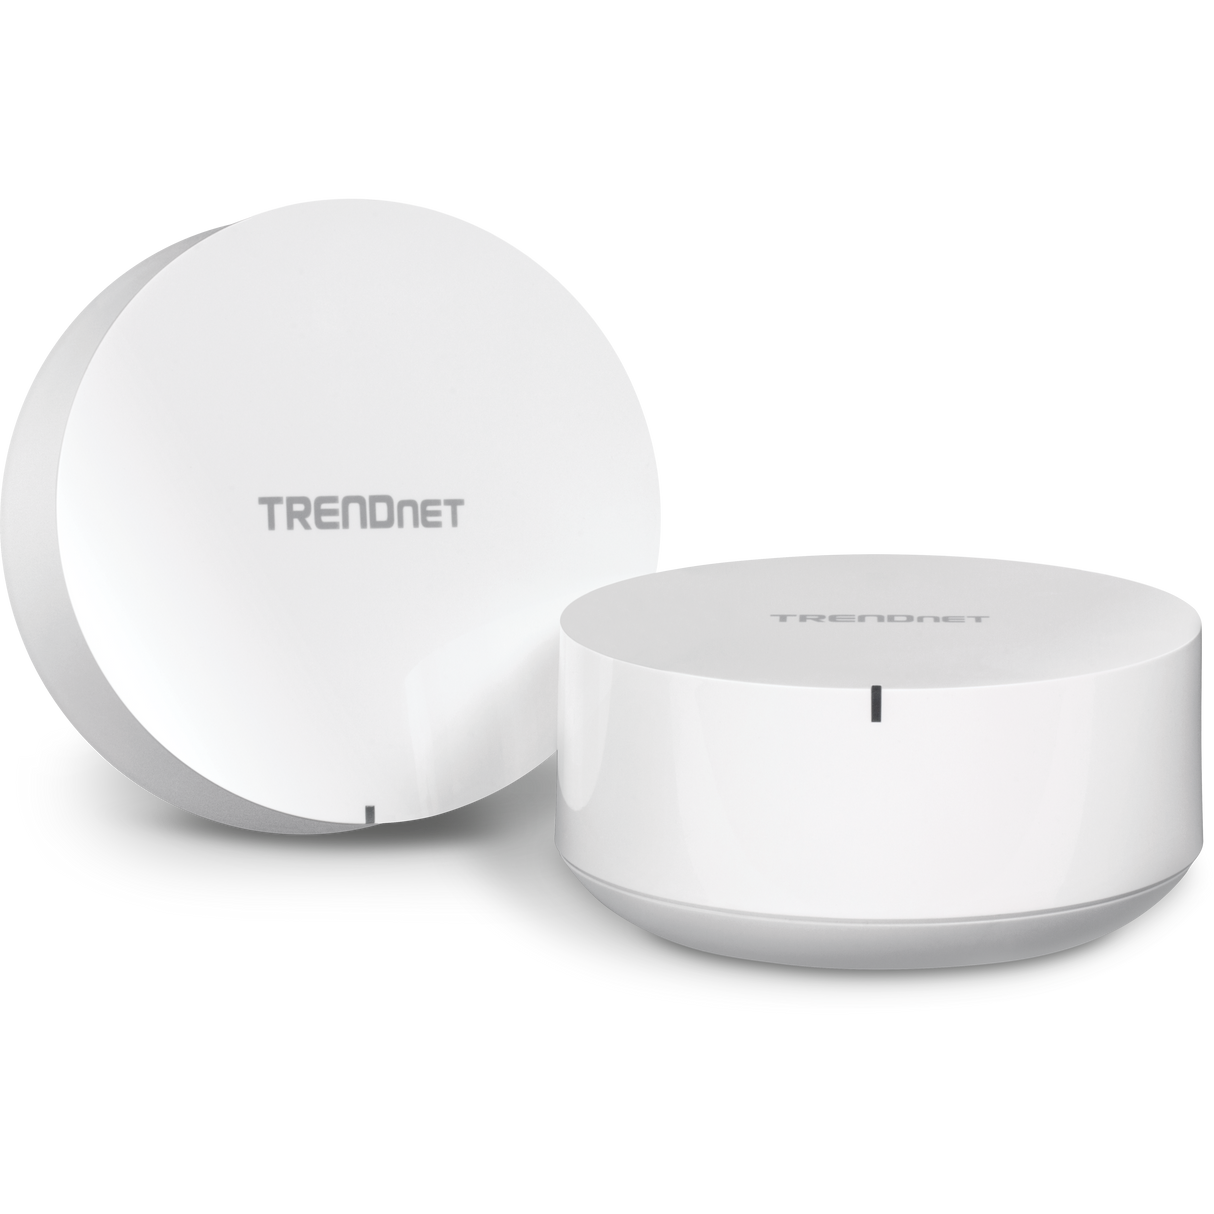 TEW-830MDR2K AC2200 WiFi Mesh Router System (2 pack)